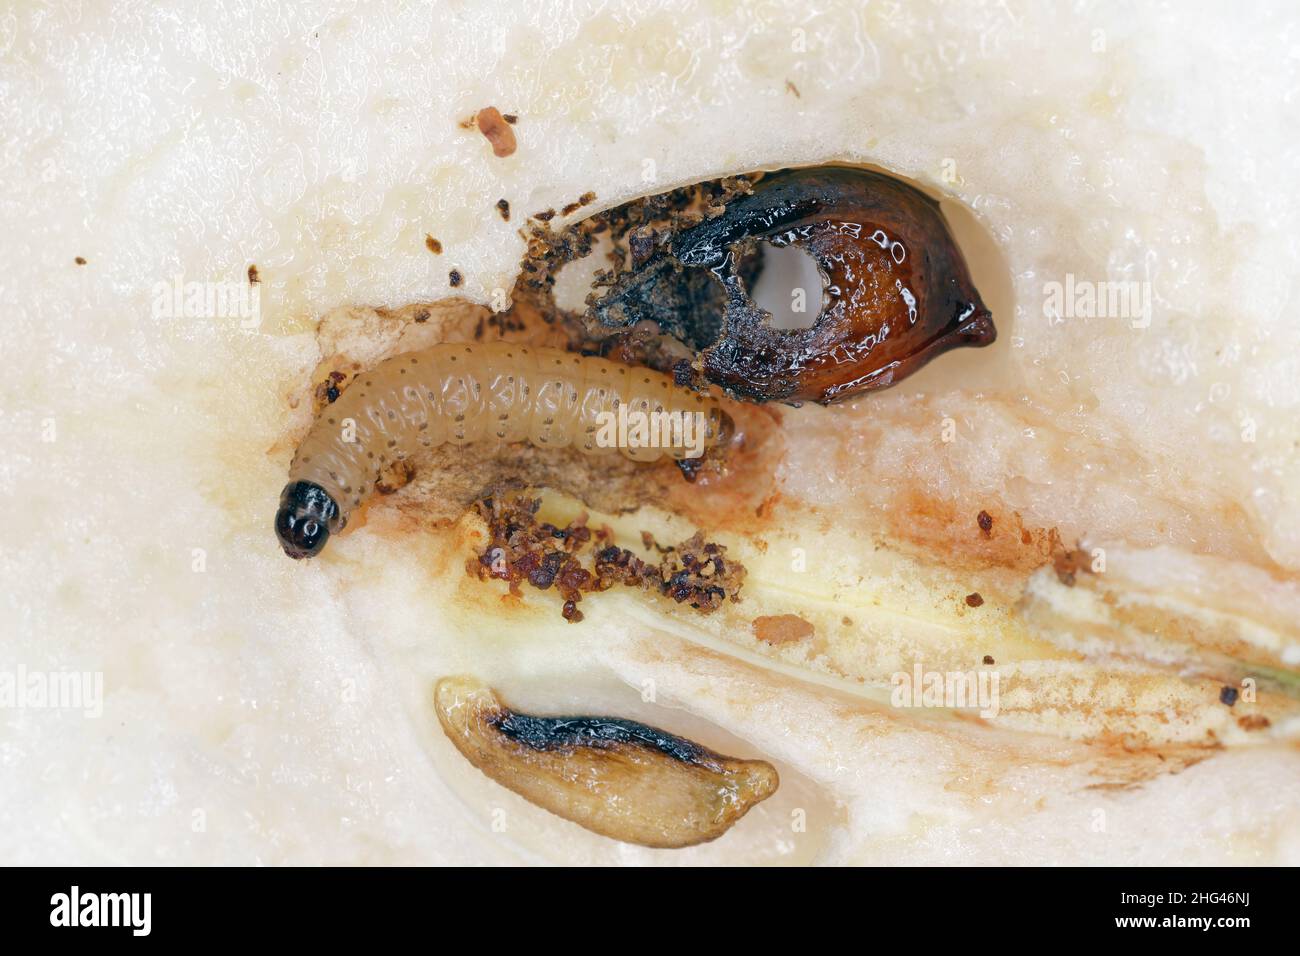 Caterpillar of the codling moth - Cydia pomonella in a pear. Major pests to agricultural crops, mainly fruits such as apples and pears in orchards. Stock Photo